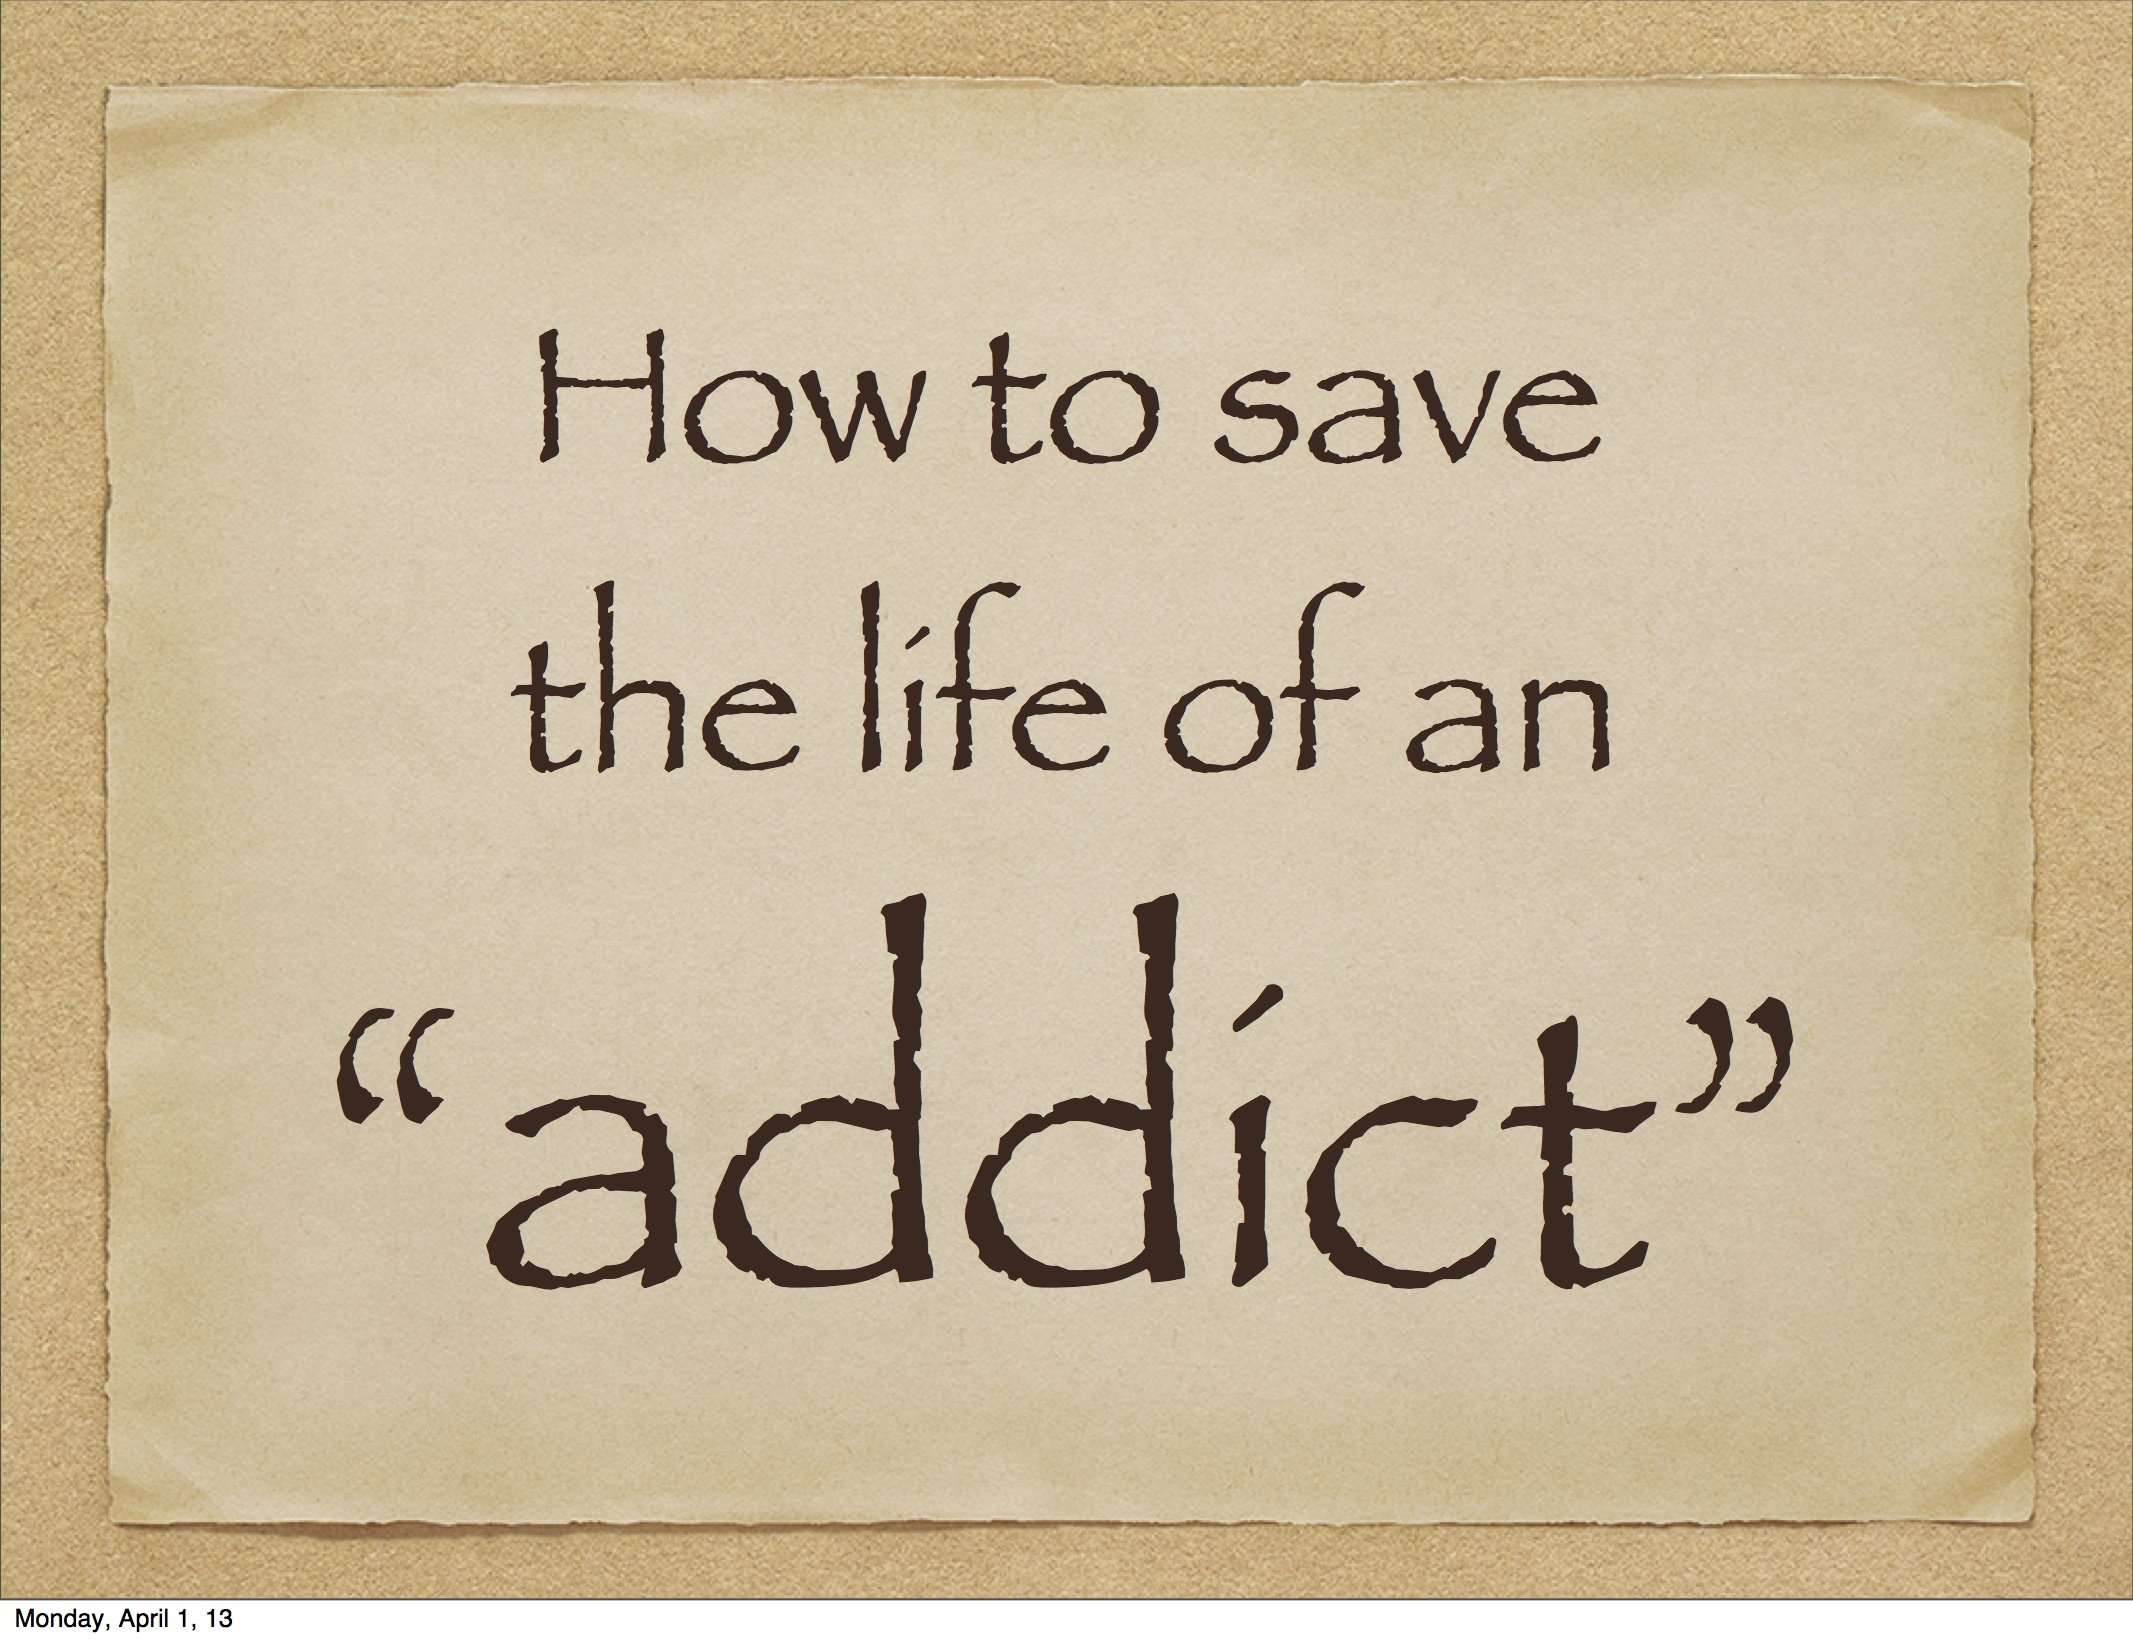 How to save the life of an addict?